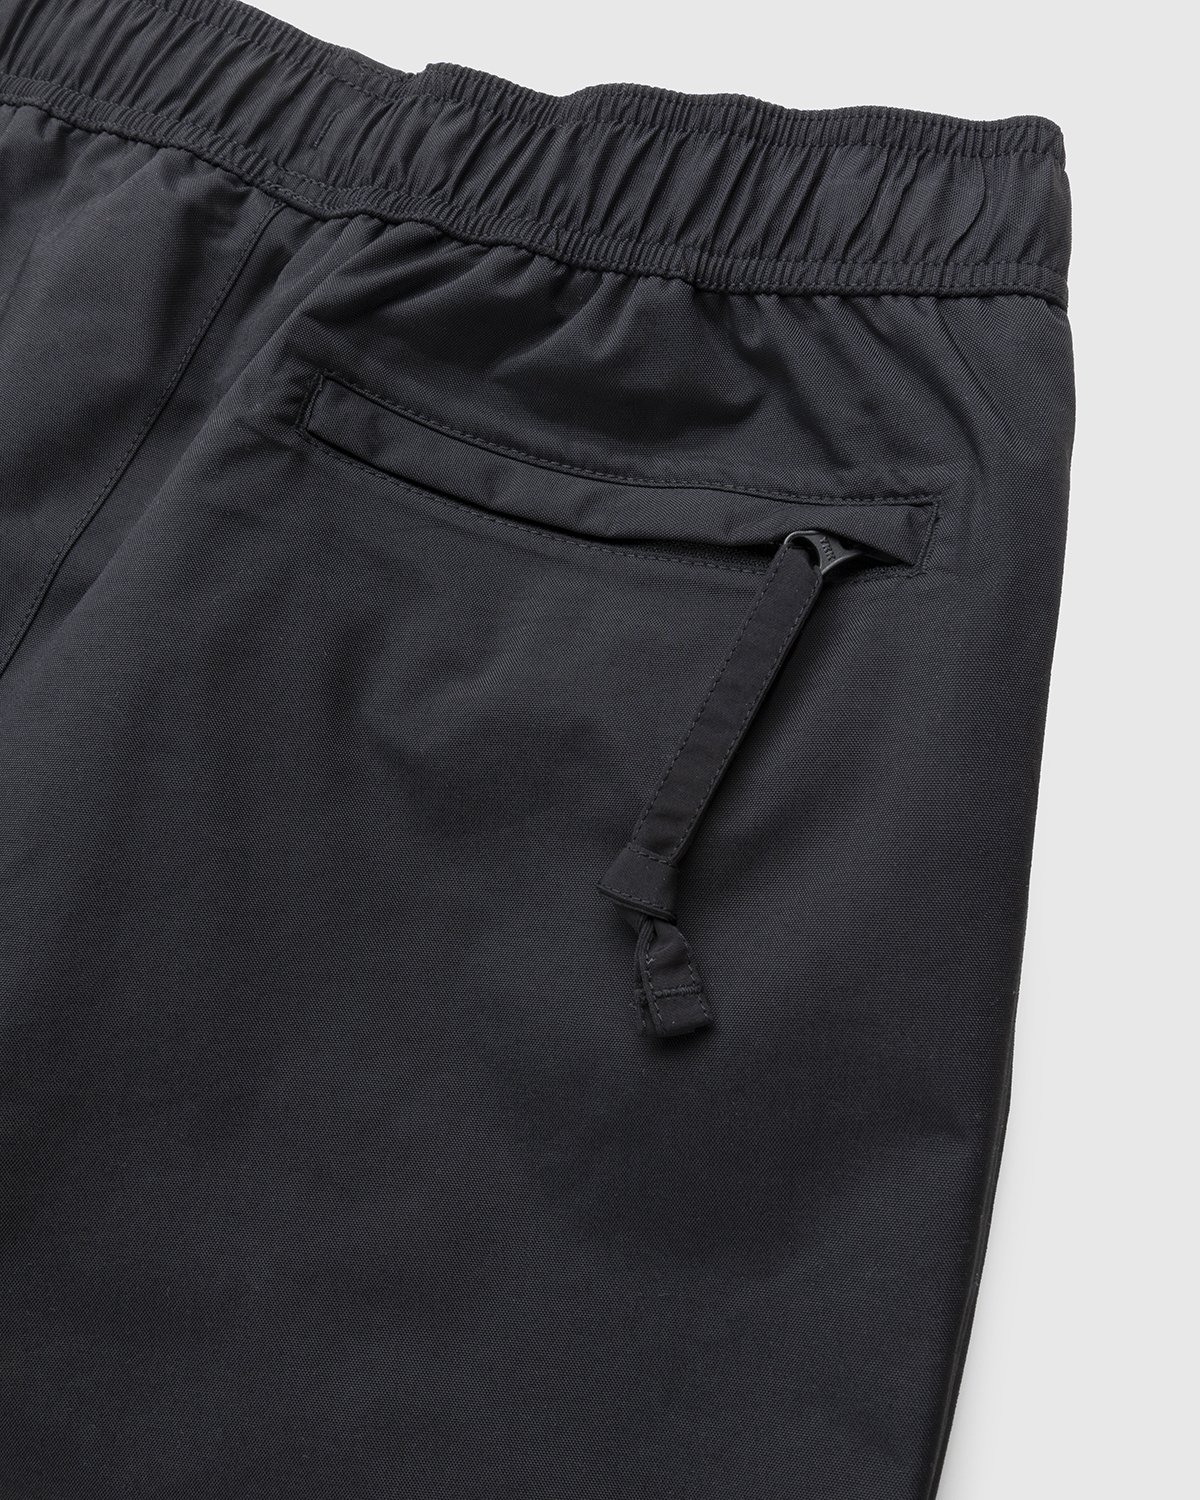 The North Face - Trans Antarctica Expedition Pant Black - Clothing - Black - Image 6